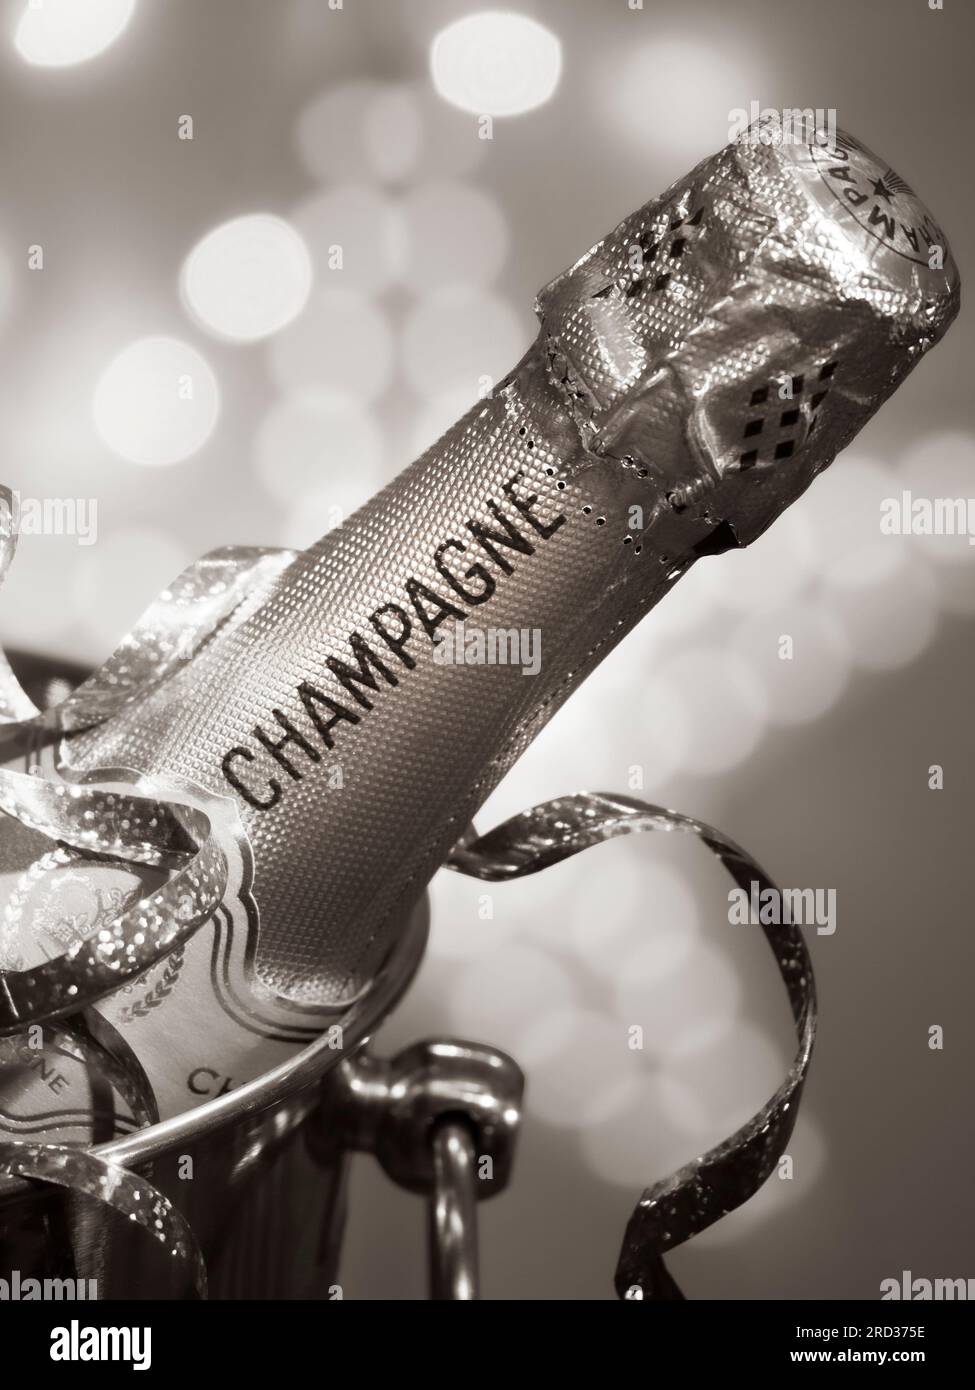 CHAMPAGNE BOTTLE RETRO ERA VINTAGE B&W PARTY LIGHTS  on ice in wine cooler champagne ice bucket, party streamers & sparkling style celebration lights Stock Photo